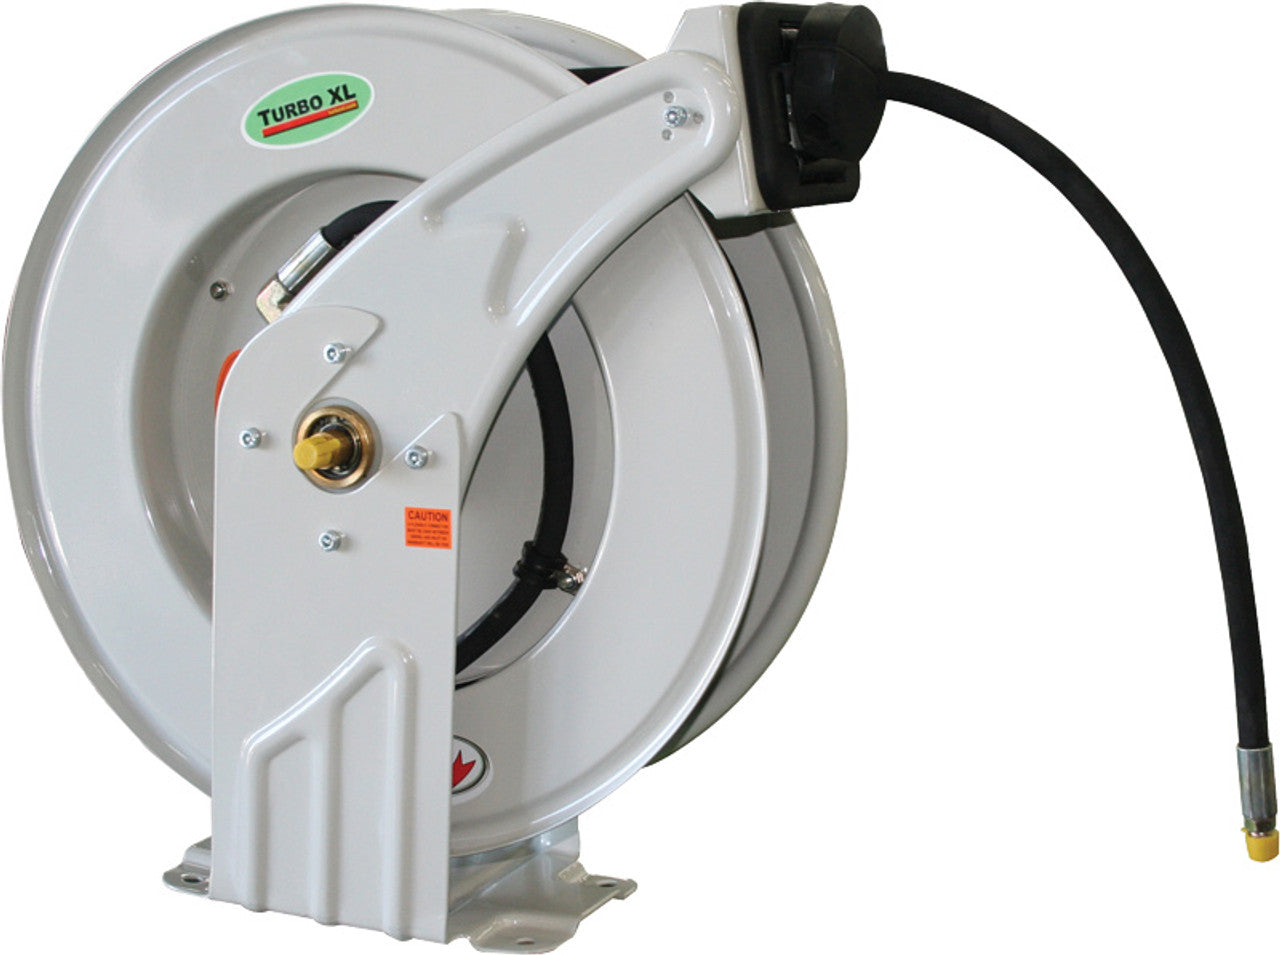 Turbo XL H820102 High Pressure Hose Reel for Grease, 5000 PSI, 1/4" x 33 Ft - MPR Tools & Equipment